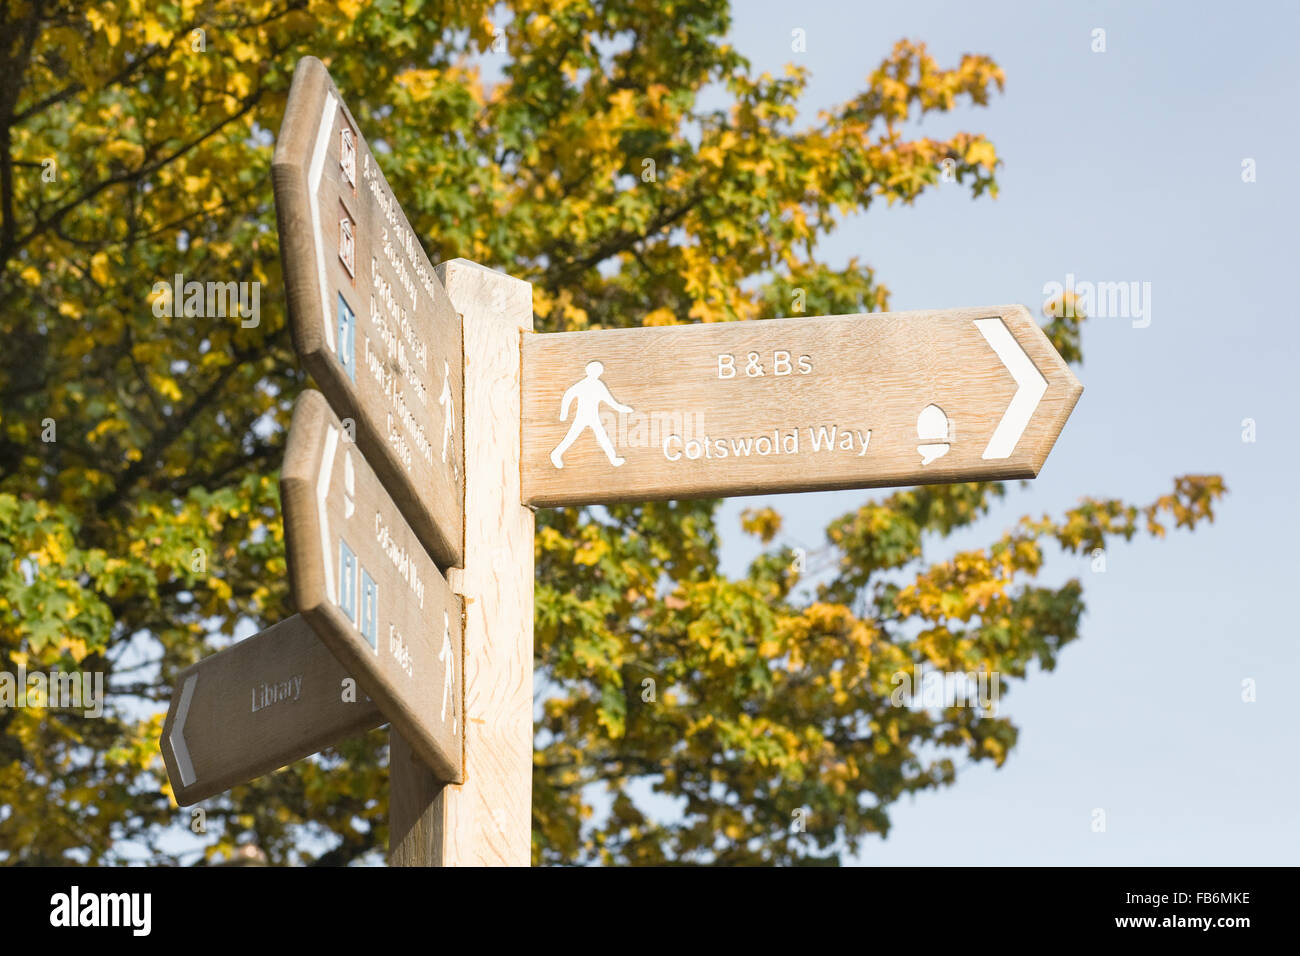 Public footpath signpost for the Cotswold Way. Stock Photo